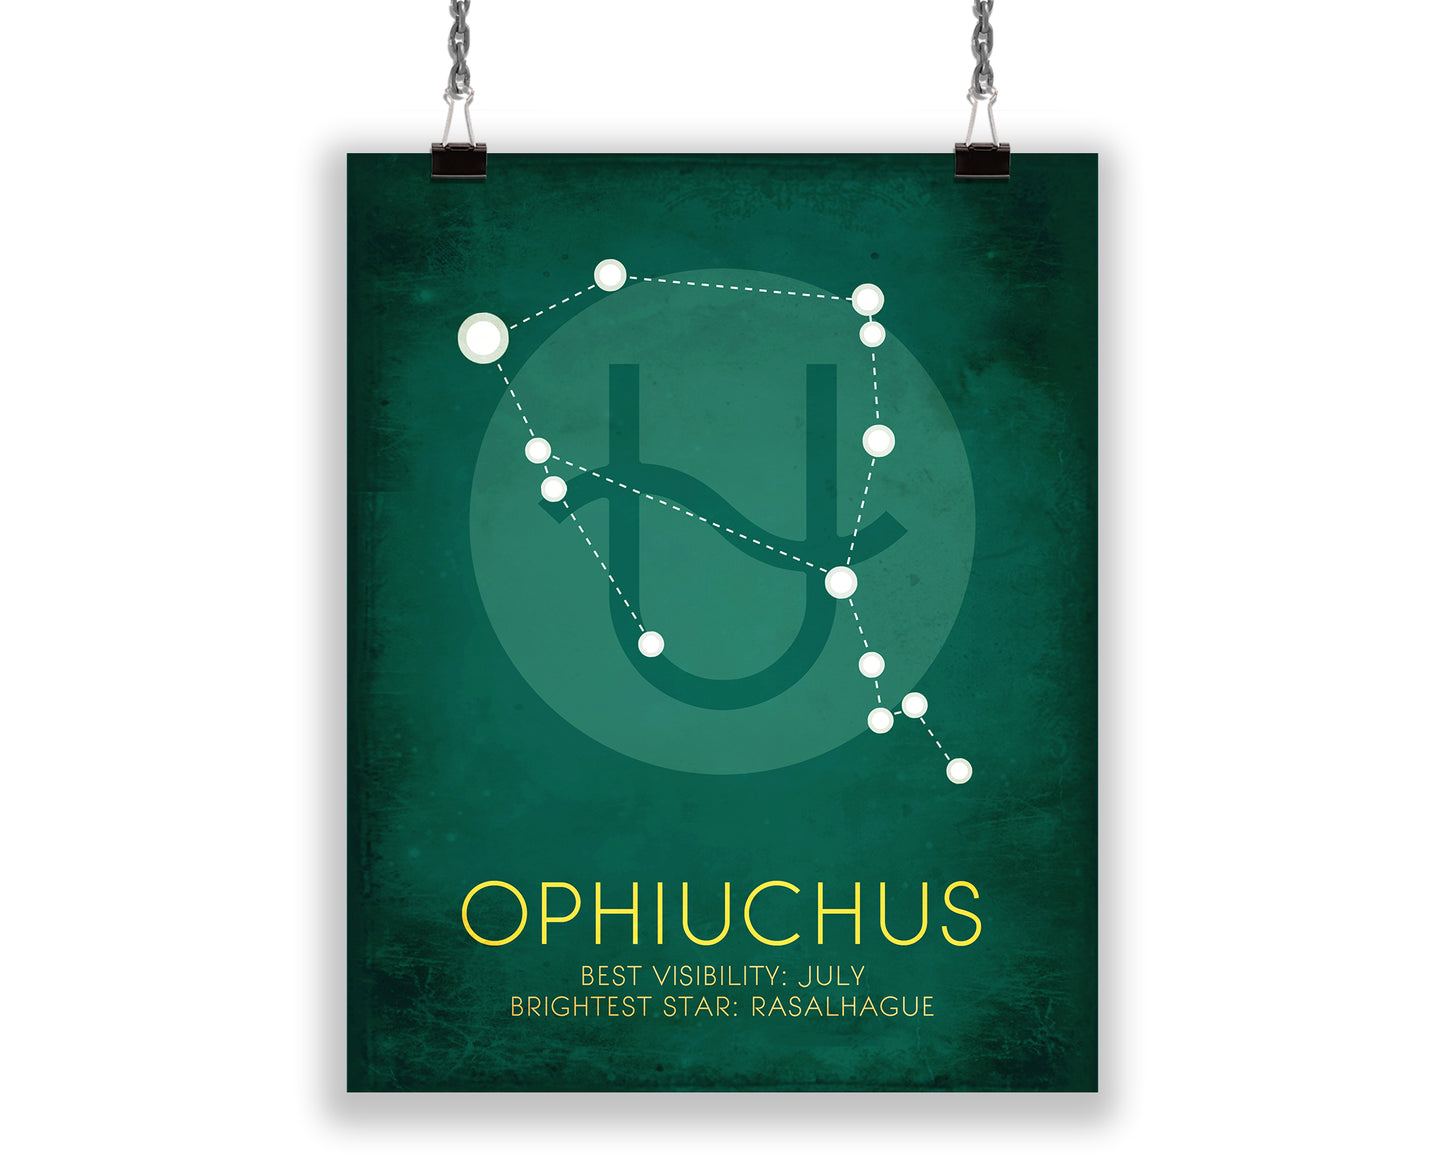  The vibrant teal green minimalist artwork showcases the Ophiuchus star constellation, provides information on the best month for visibility, and the brightest star.